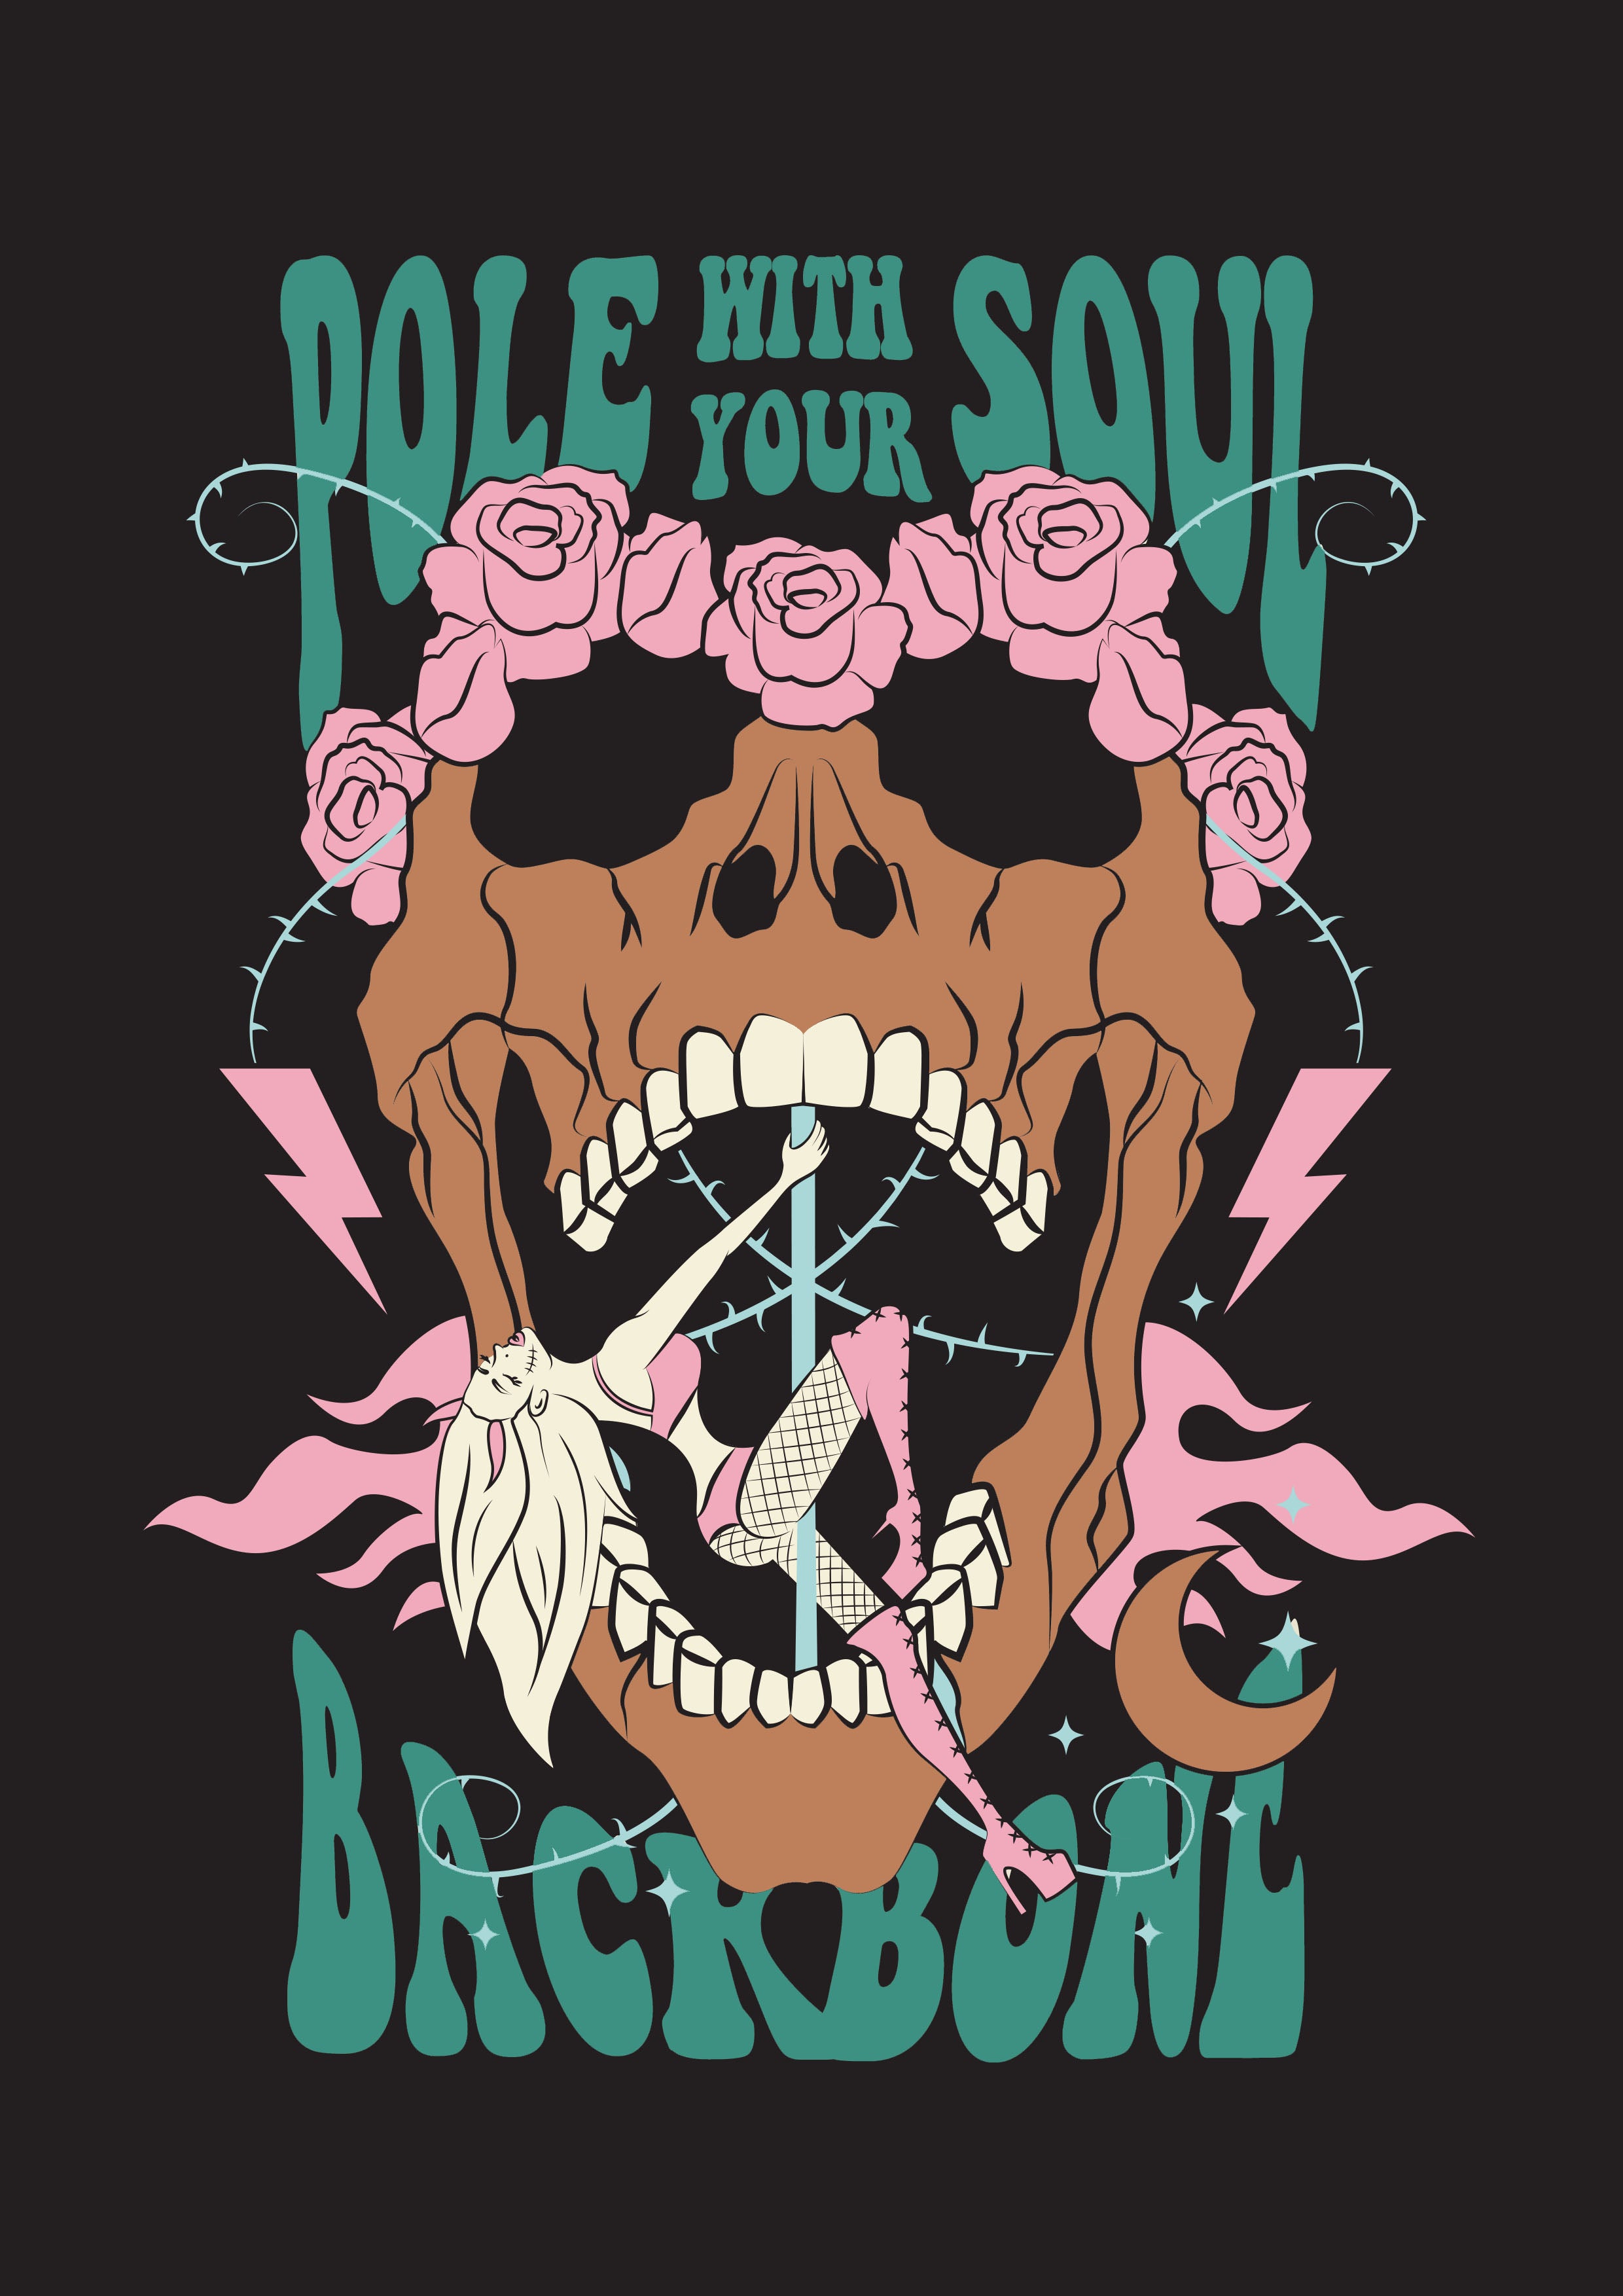 Pole with your soul t-shirt